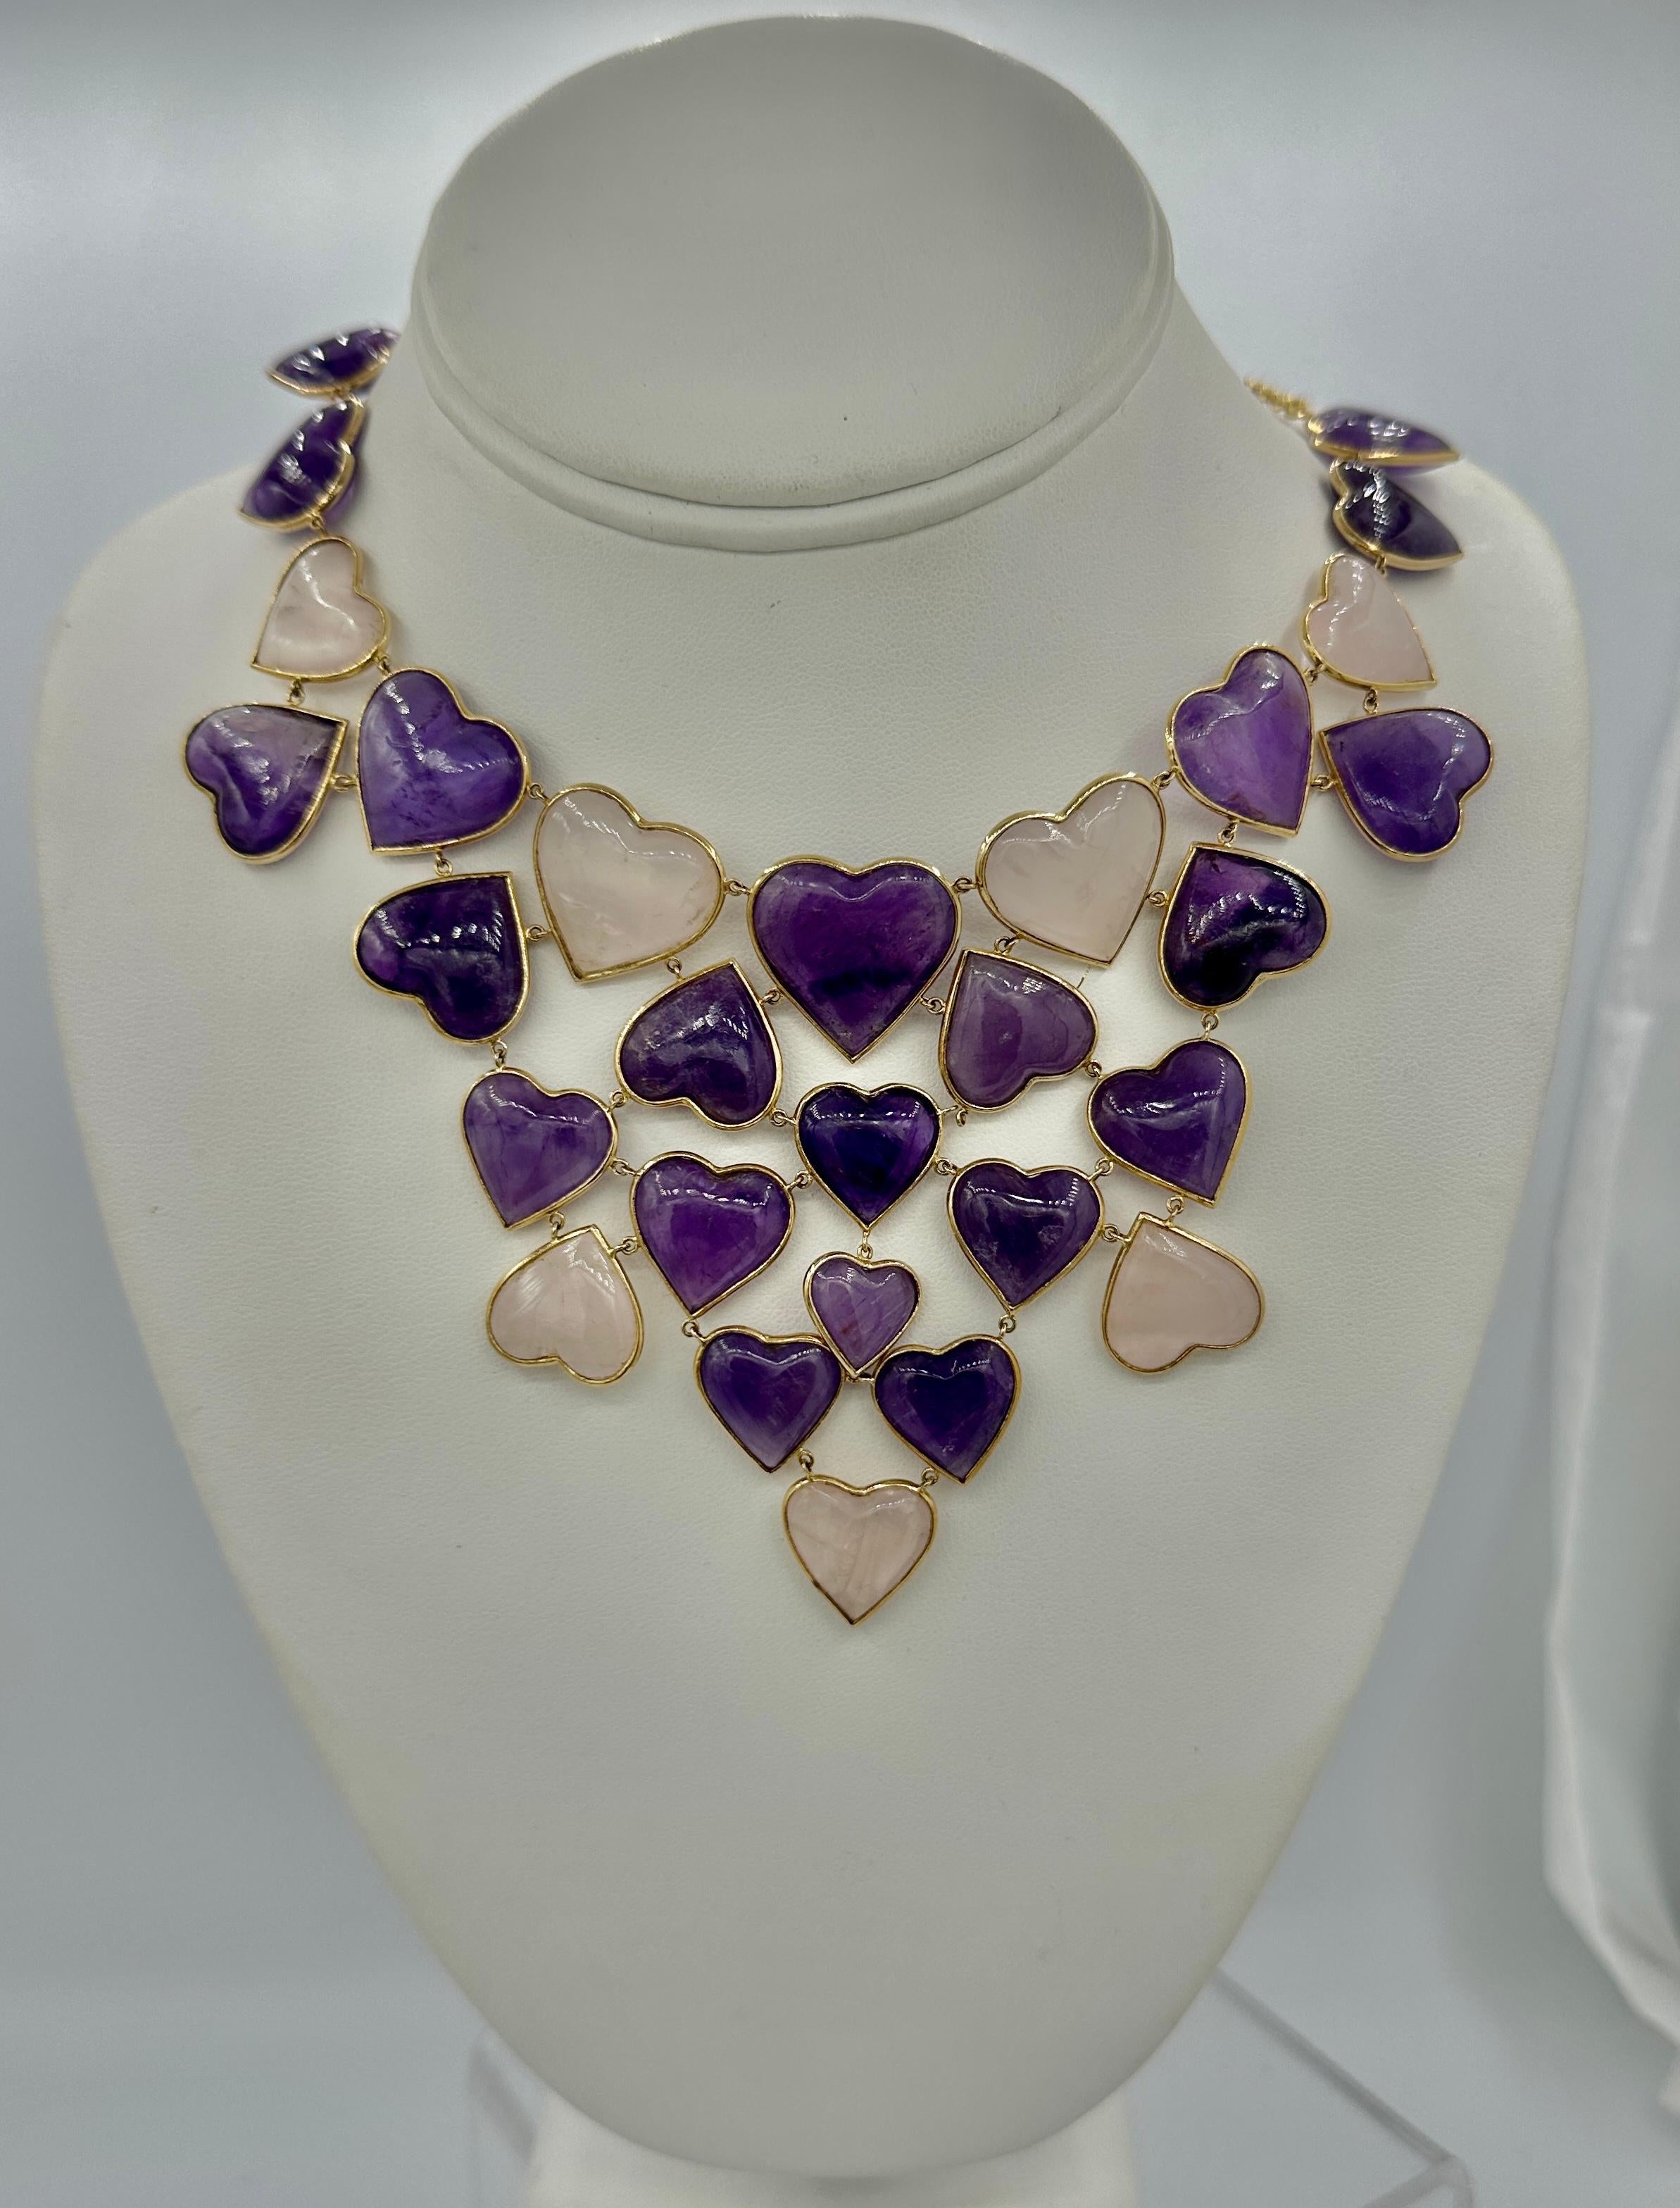 Amethyst Rose Quartz Heart Necklace and Earrings 14 Karat Gold Ms. Daves Estate For Sale 1